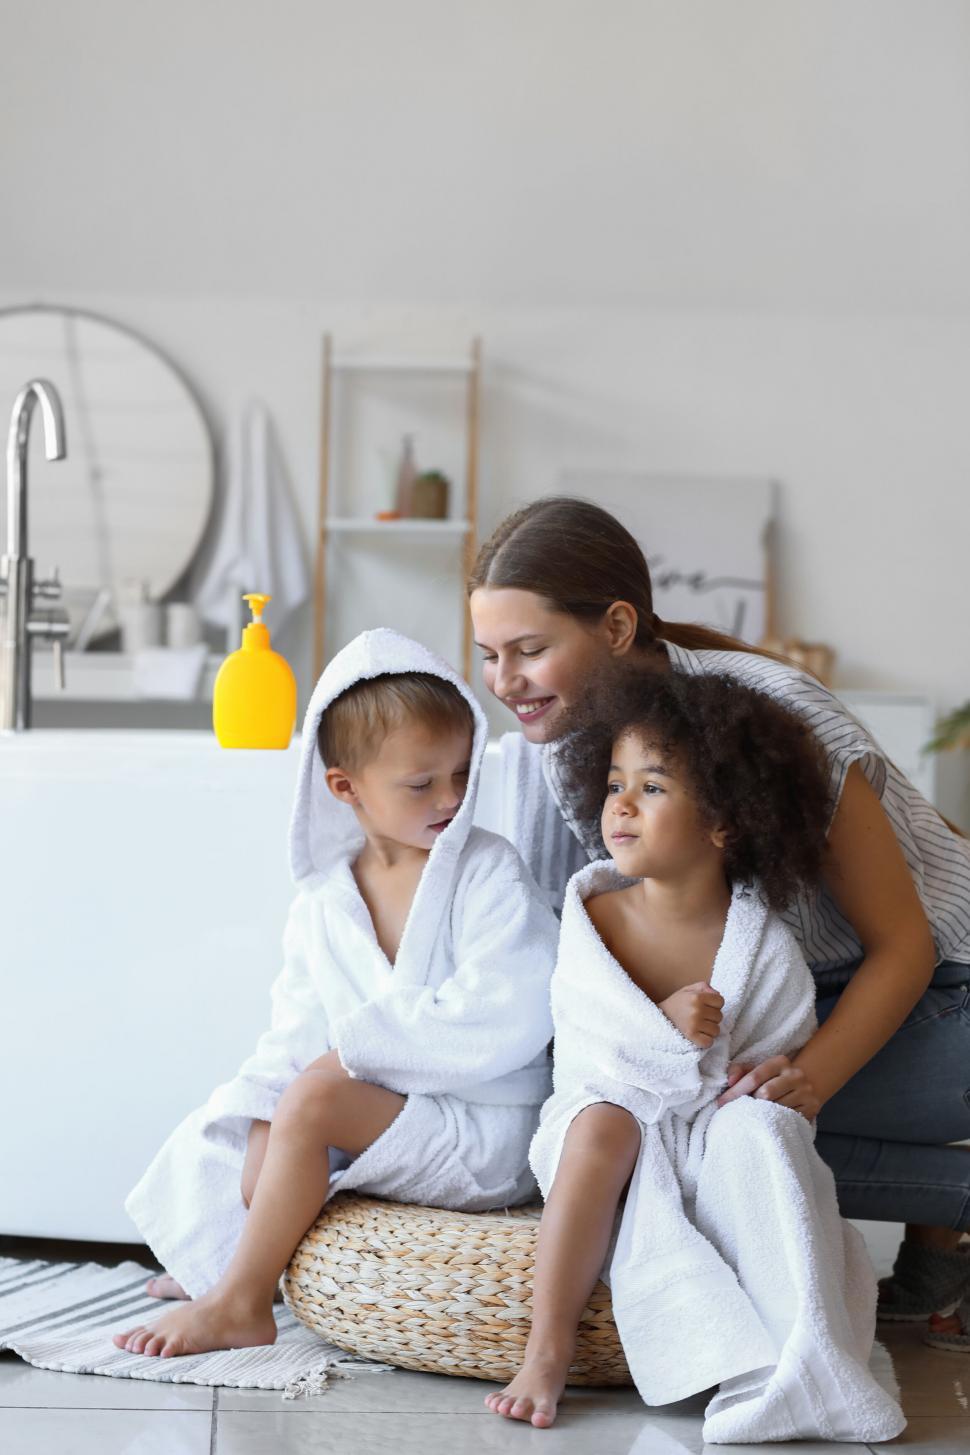 Free Image of Mother with children in bathrobes smiling 